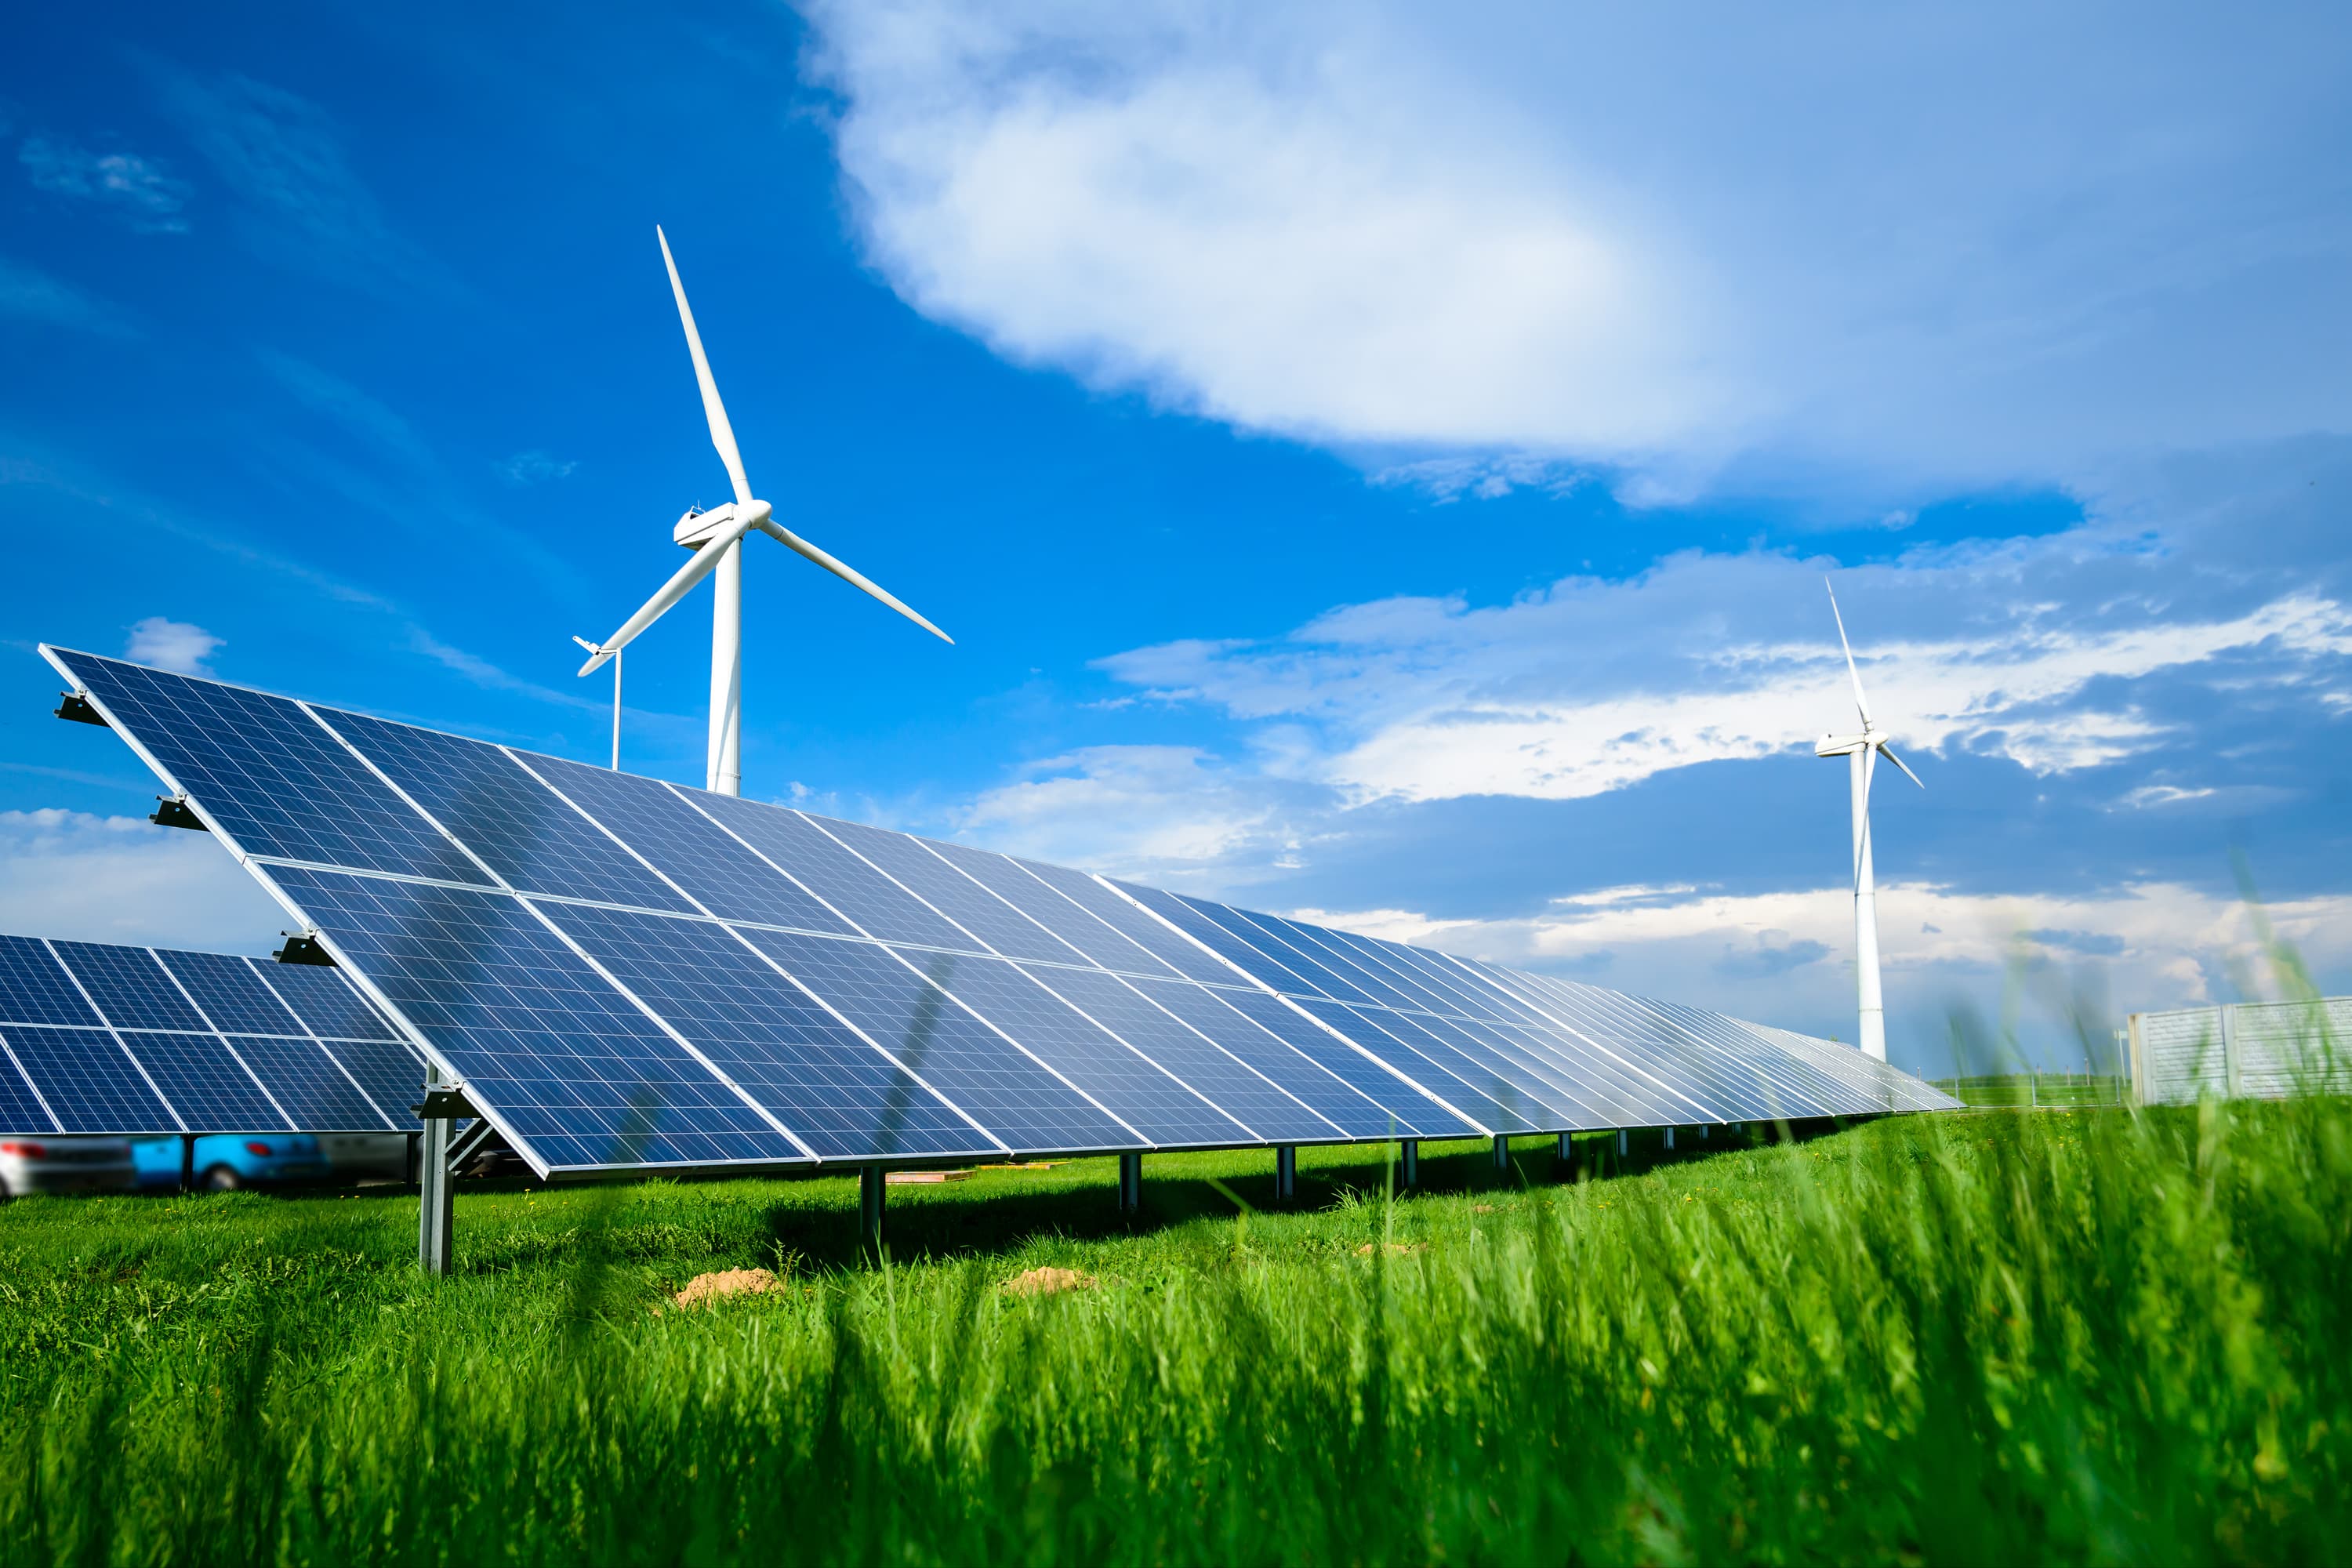 Photovoltaic panels with wind turbines